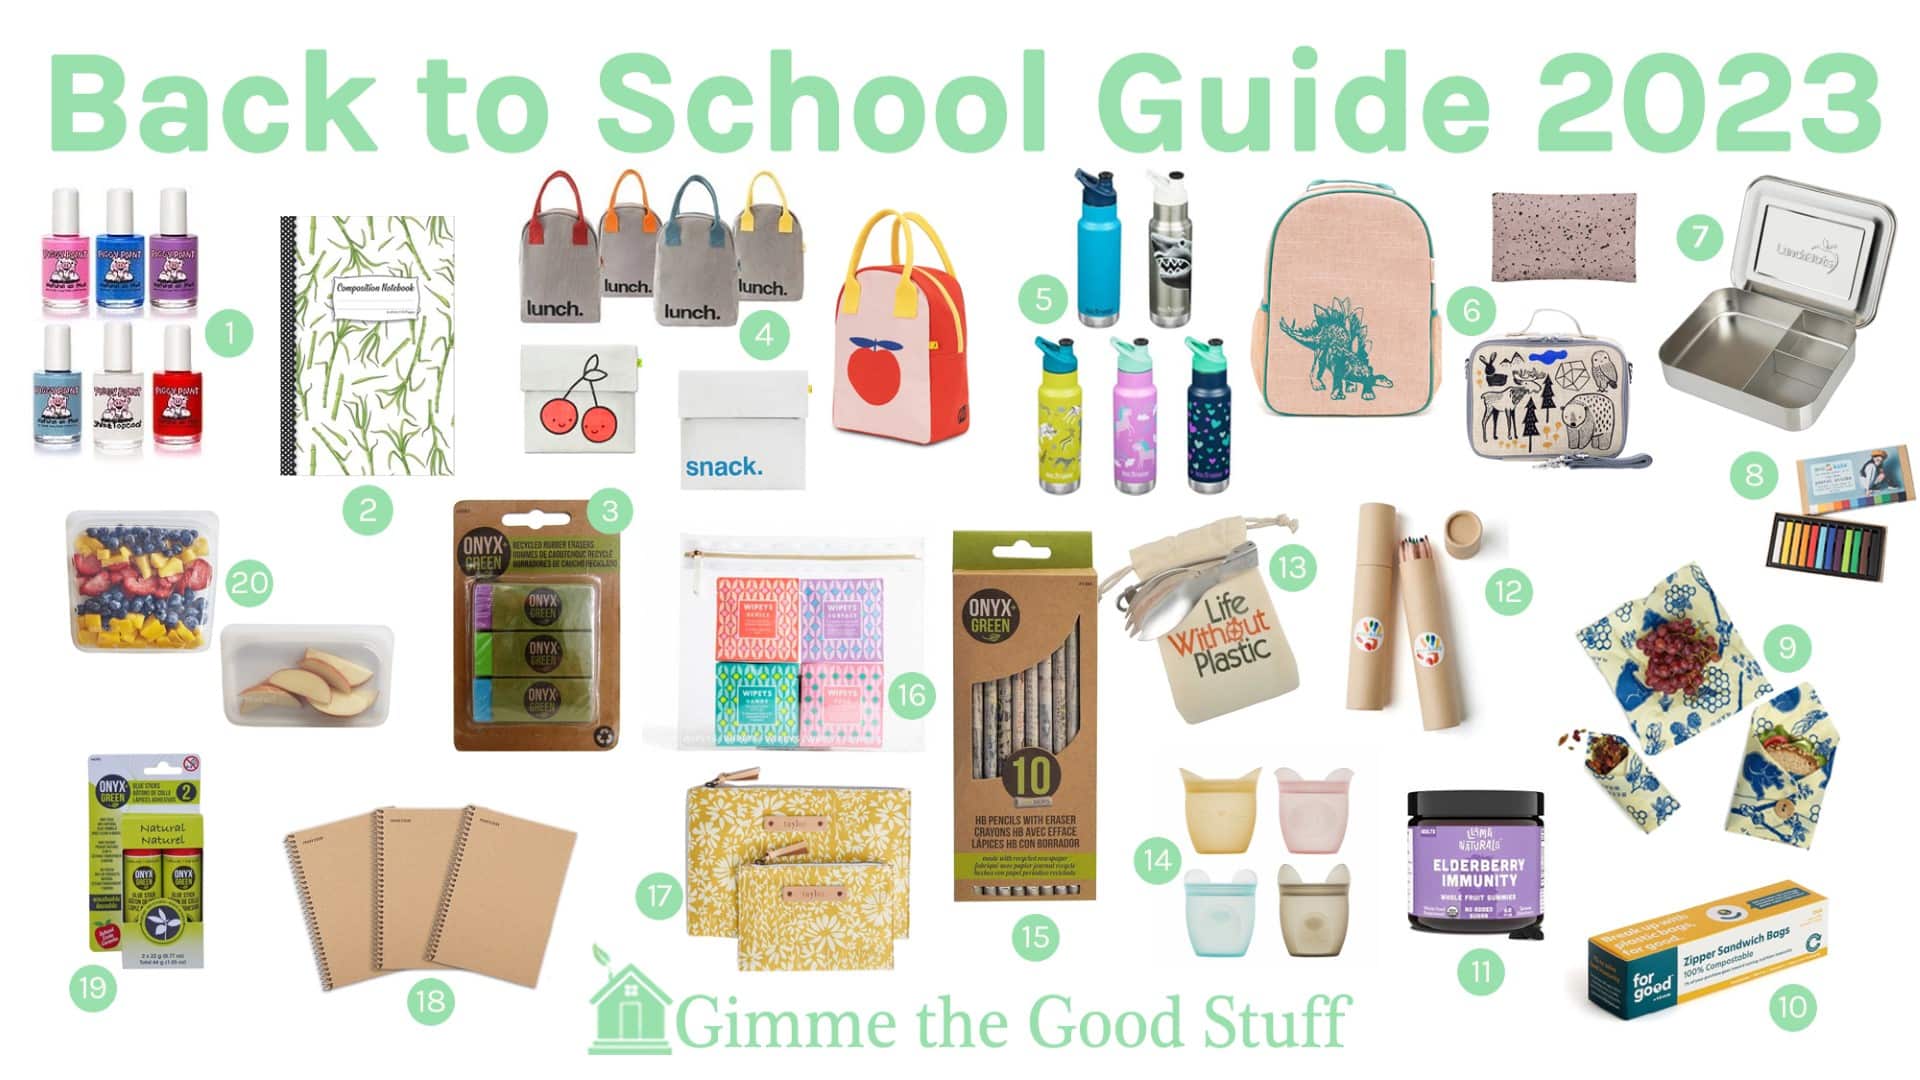 Non-toxic back-to-school infographic